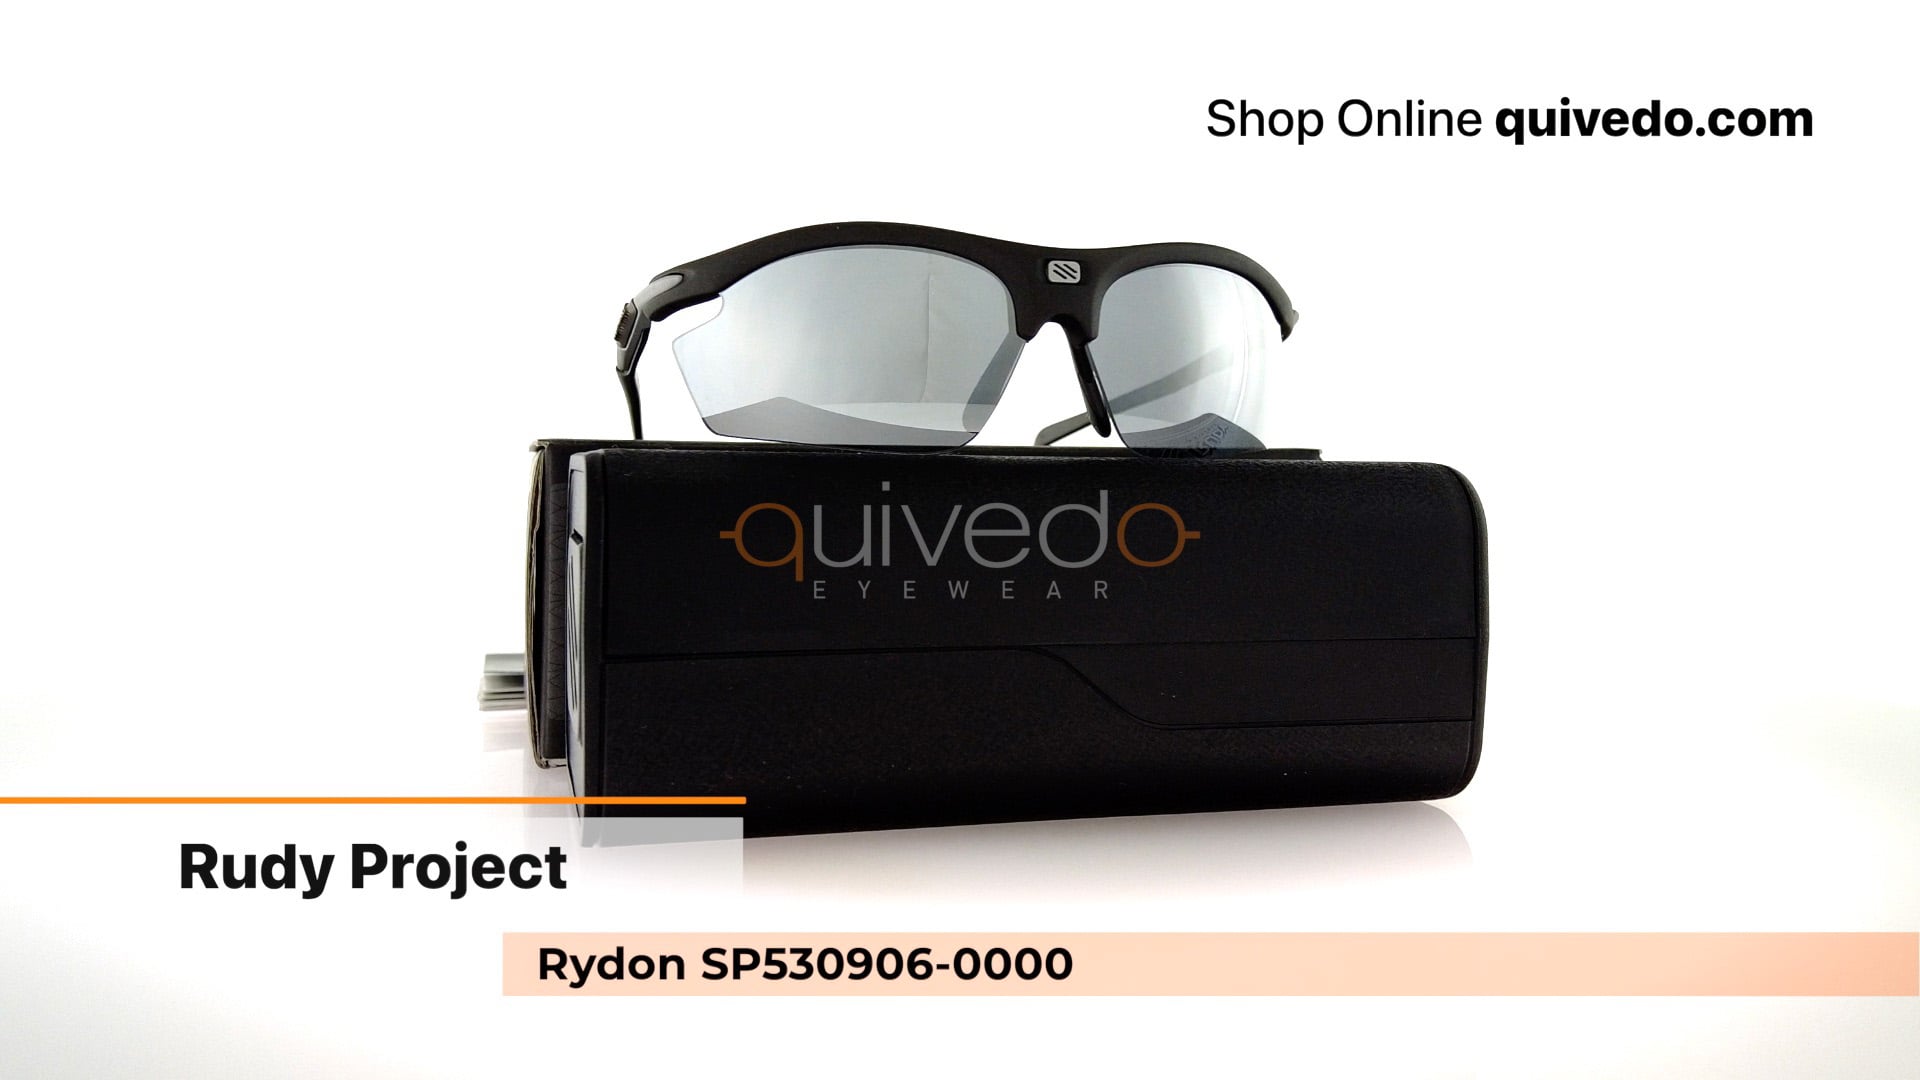 Rudy Project Rydon SP530906-0000